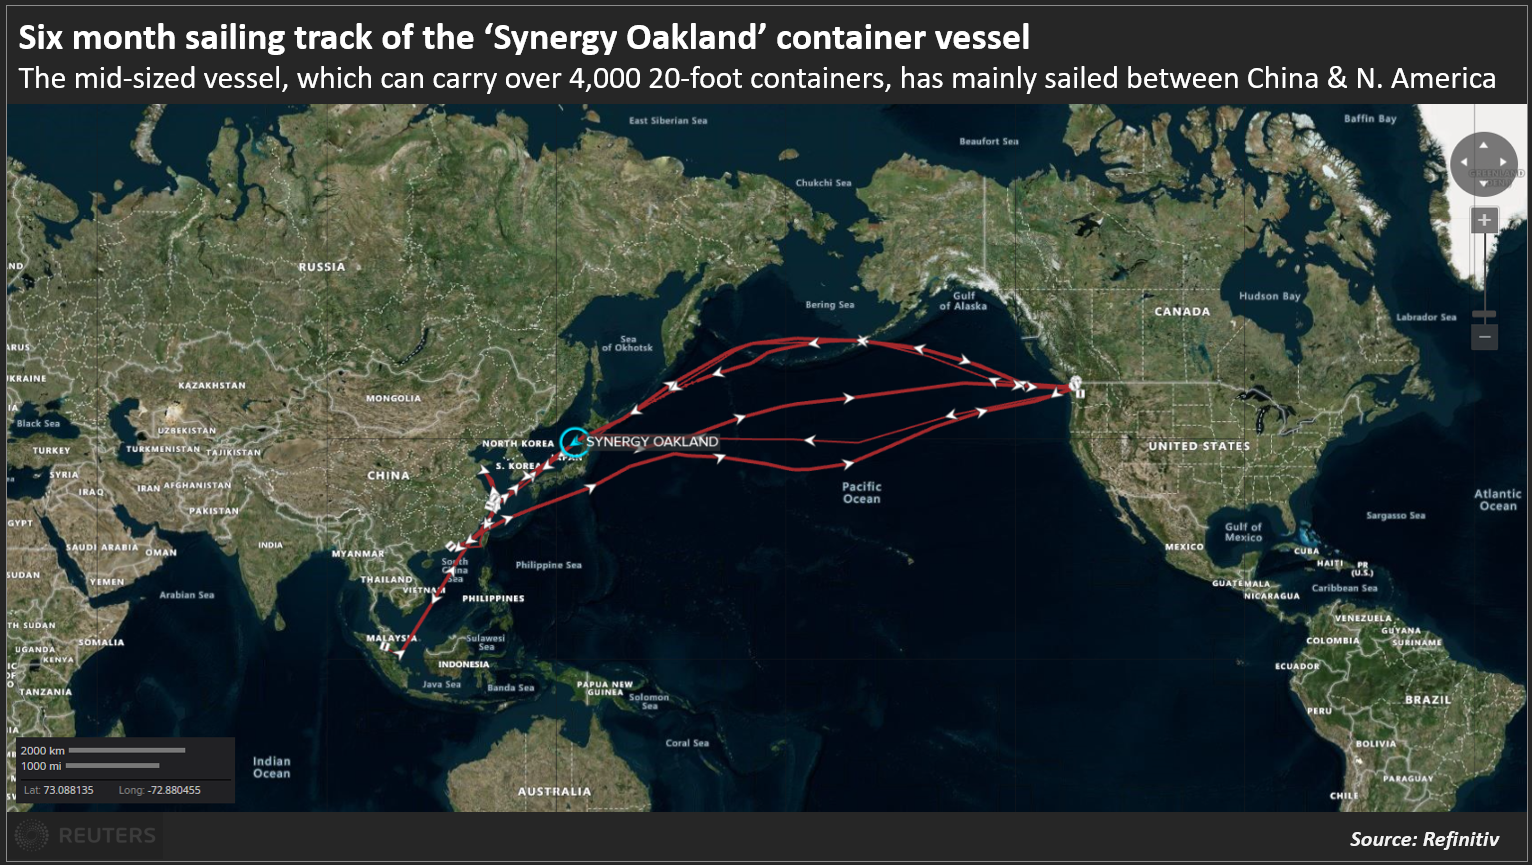 Six month sailing track of the ‘Synergy Oakland’ container vessel